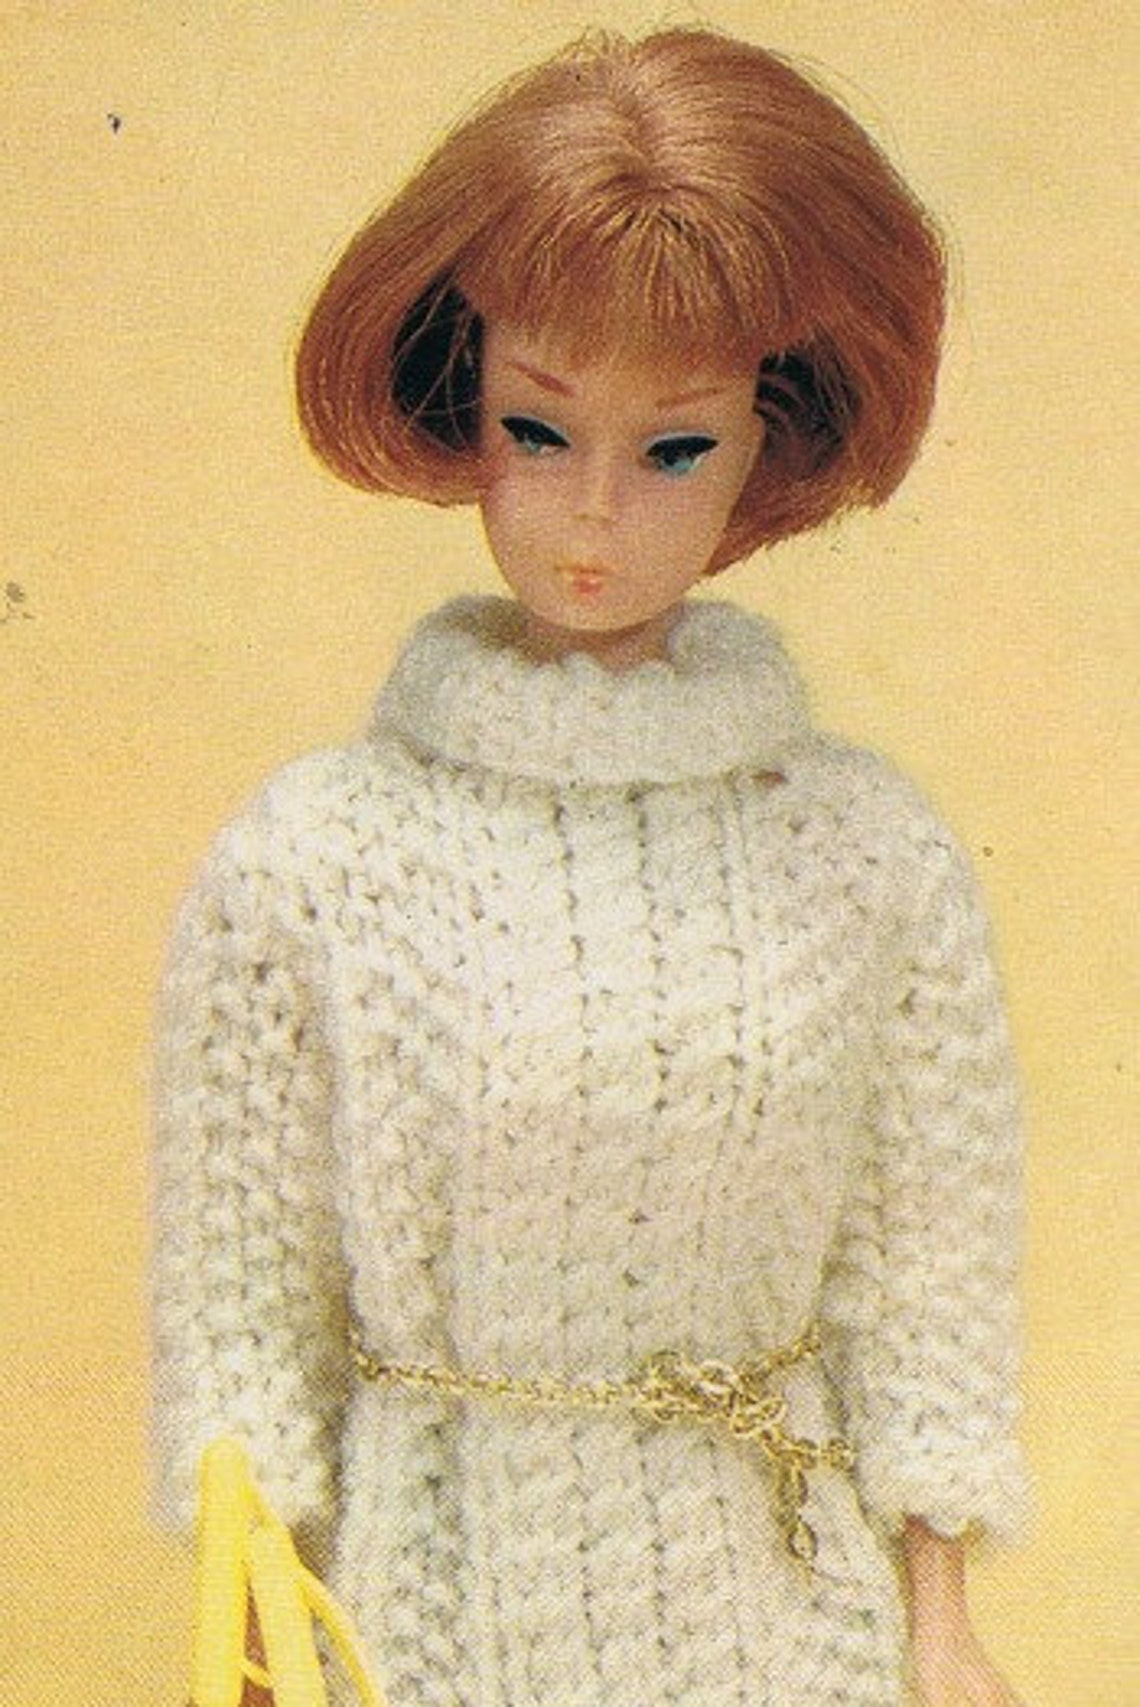 Barbie Clothes Knitting Pattern 4 Sweater Patterns for - Etsy